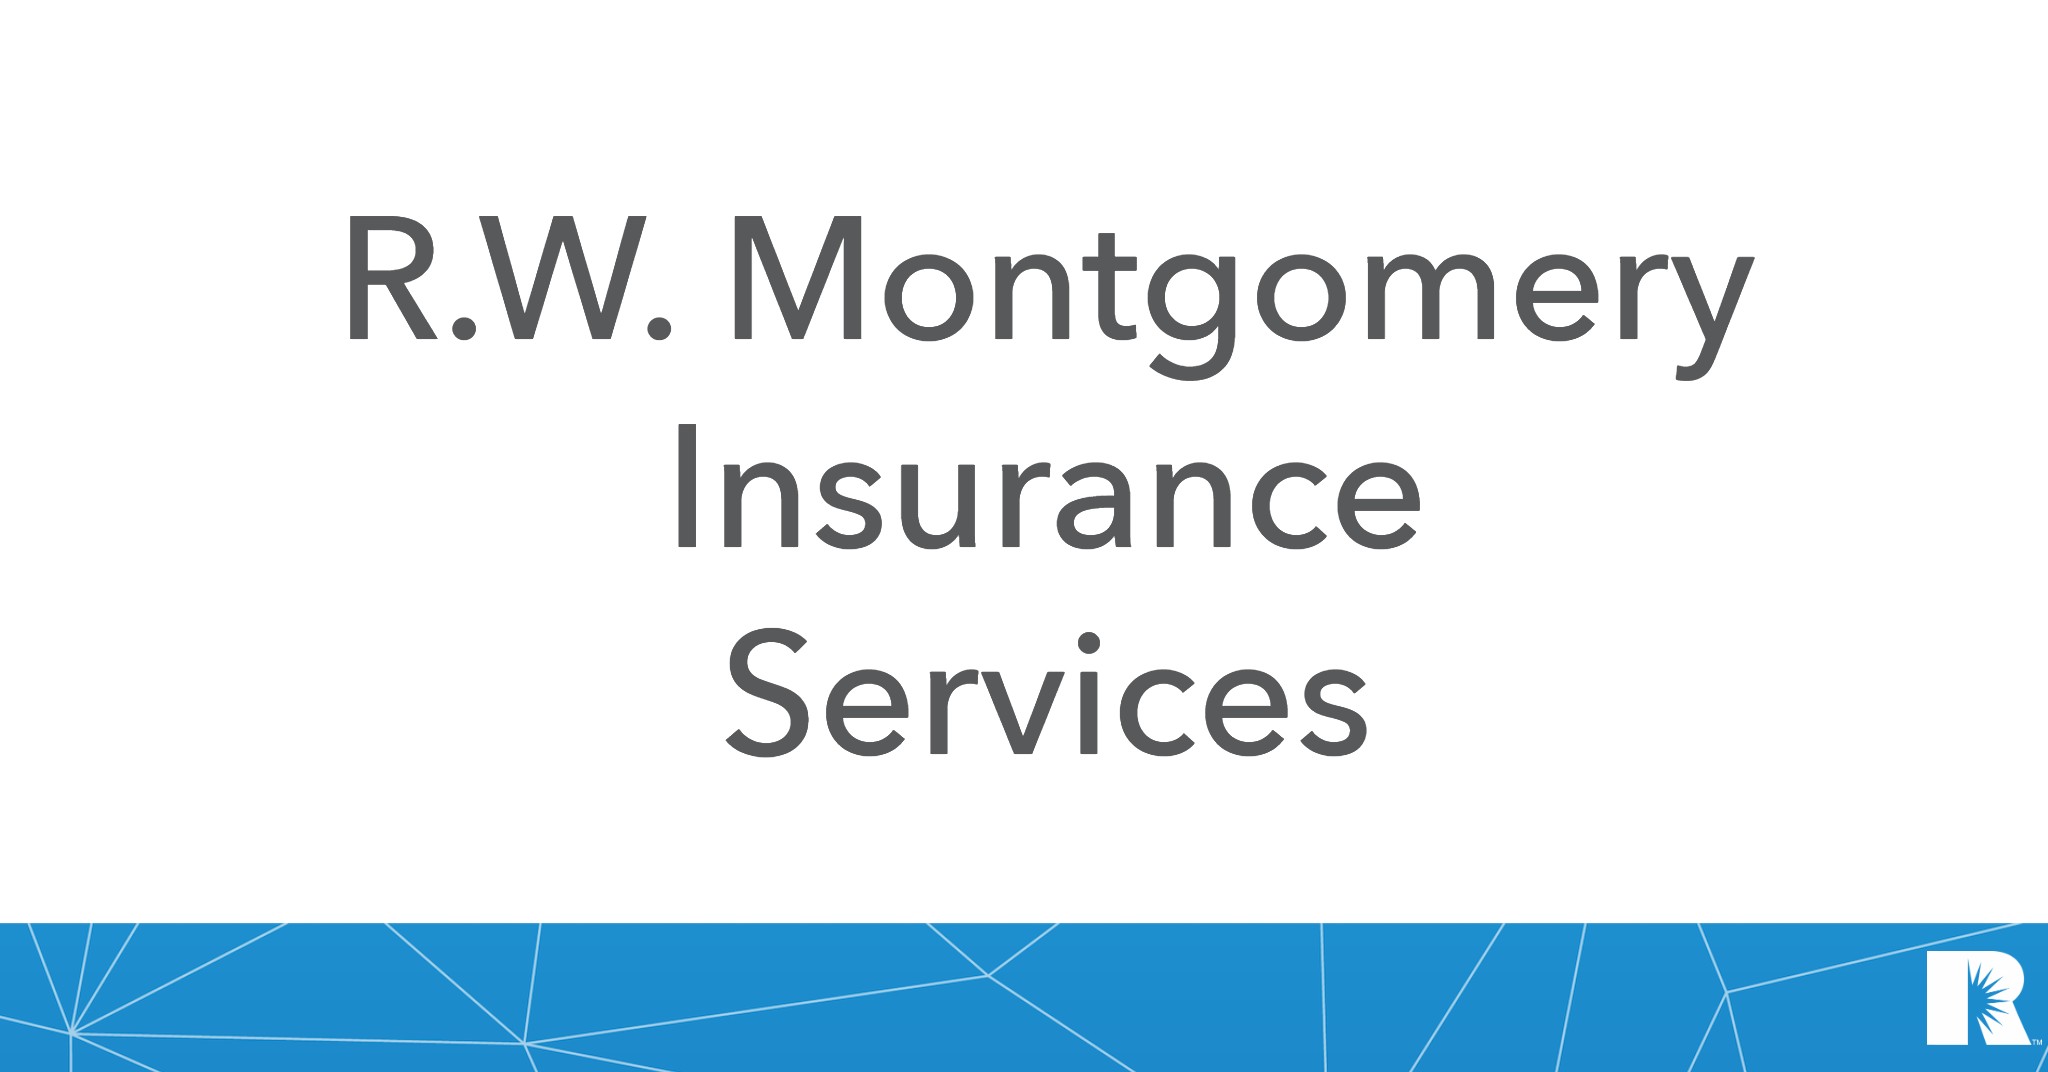 Nameplate for R.W. Montgomery Insurance Services.